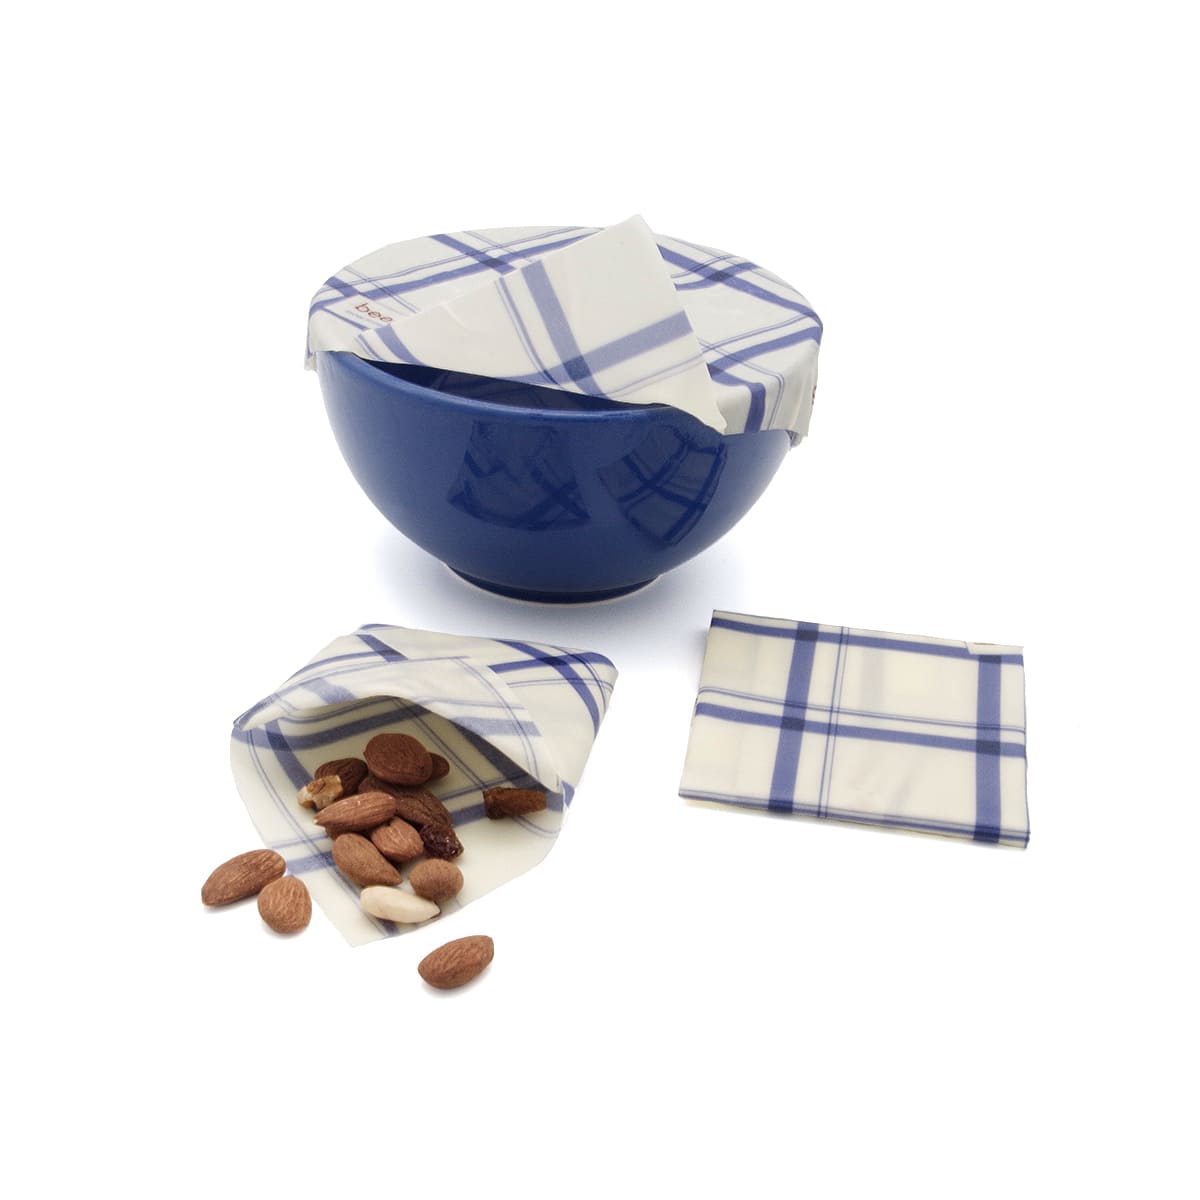 beeskin beeswax wrap multi kitchen covering a blue bowl and a folded envelope for nuts